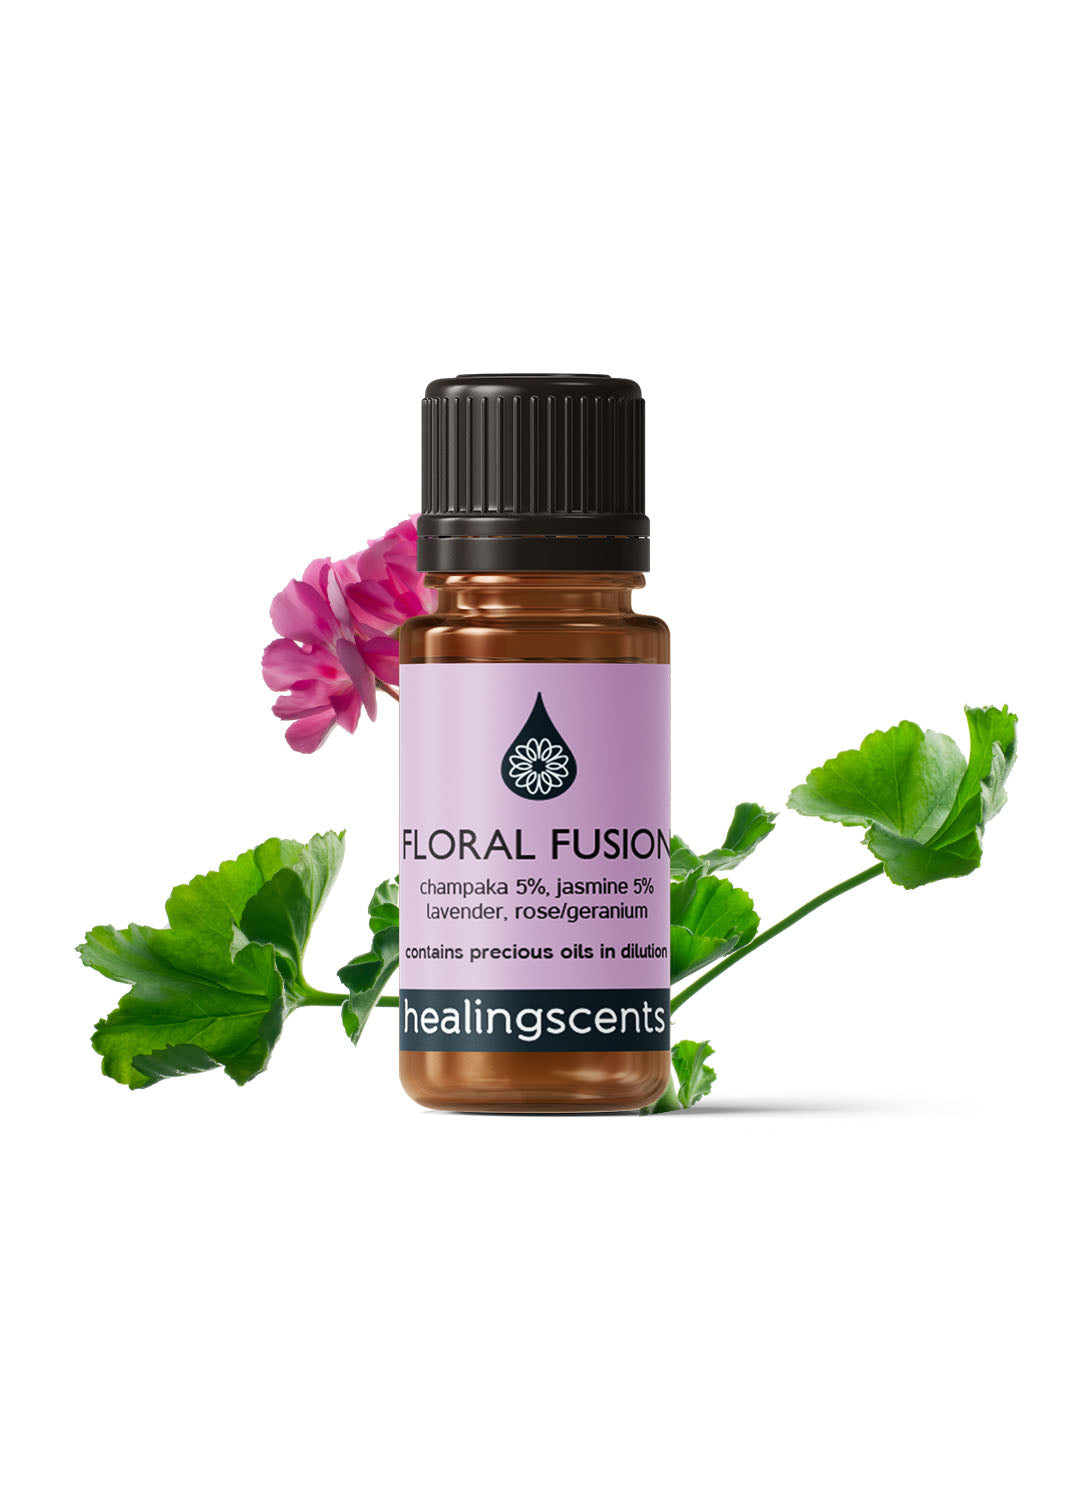 Floral Fusion Synergy Blend Natural Perfumes Healingscents   